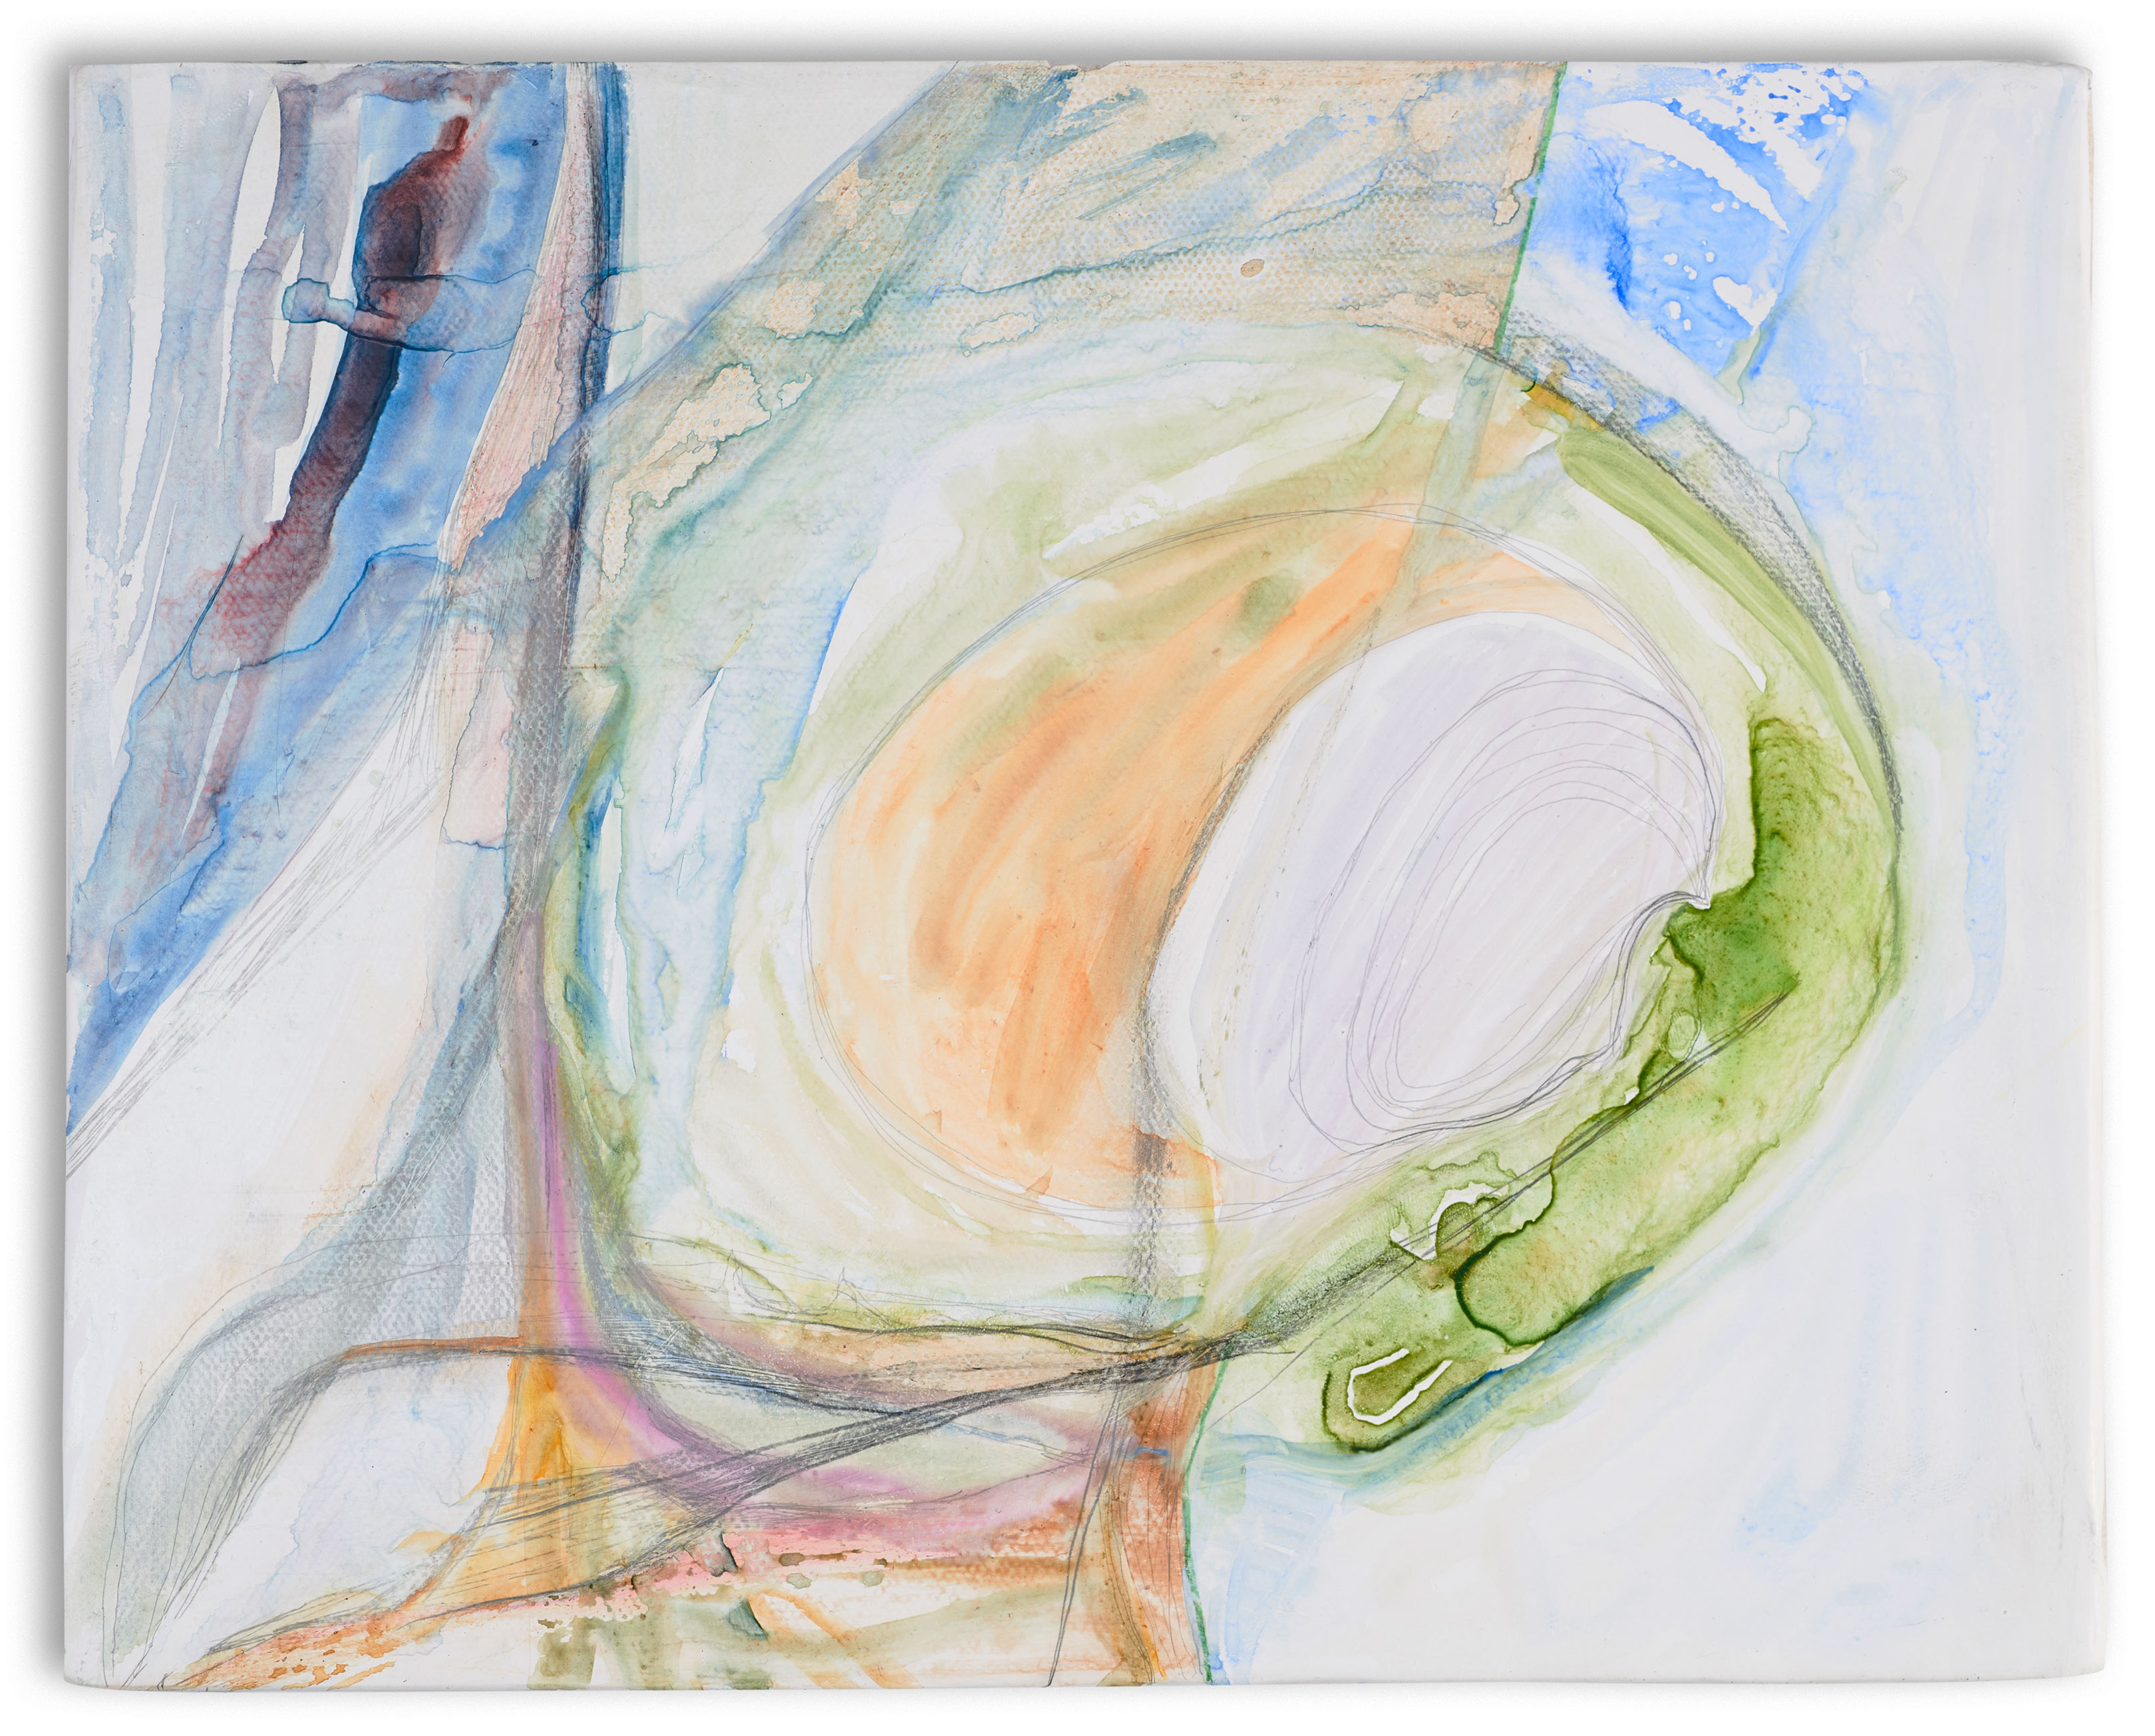 An abstract watercolor by artist Caroline Coolidge shows a central circular green, white, and orange form and blue, white, and gray lines in the background.